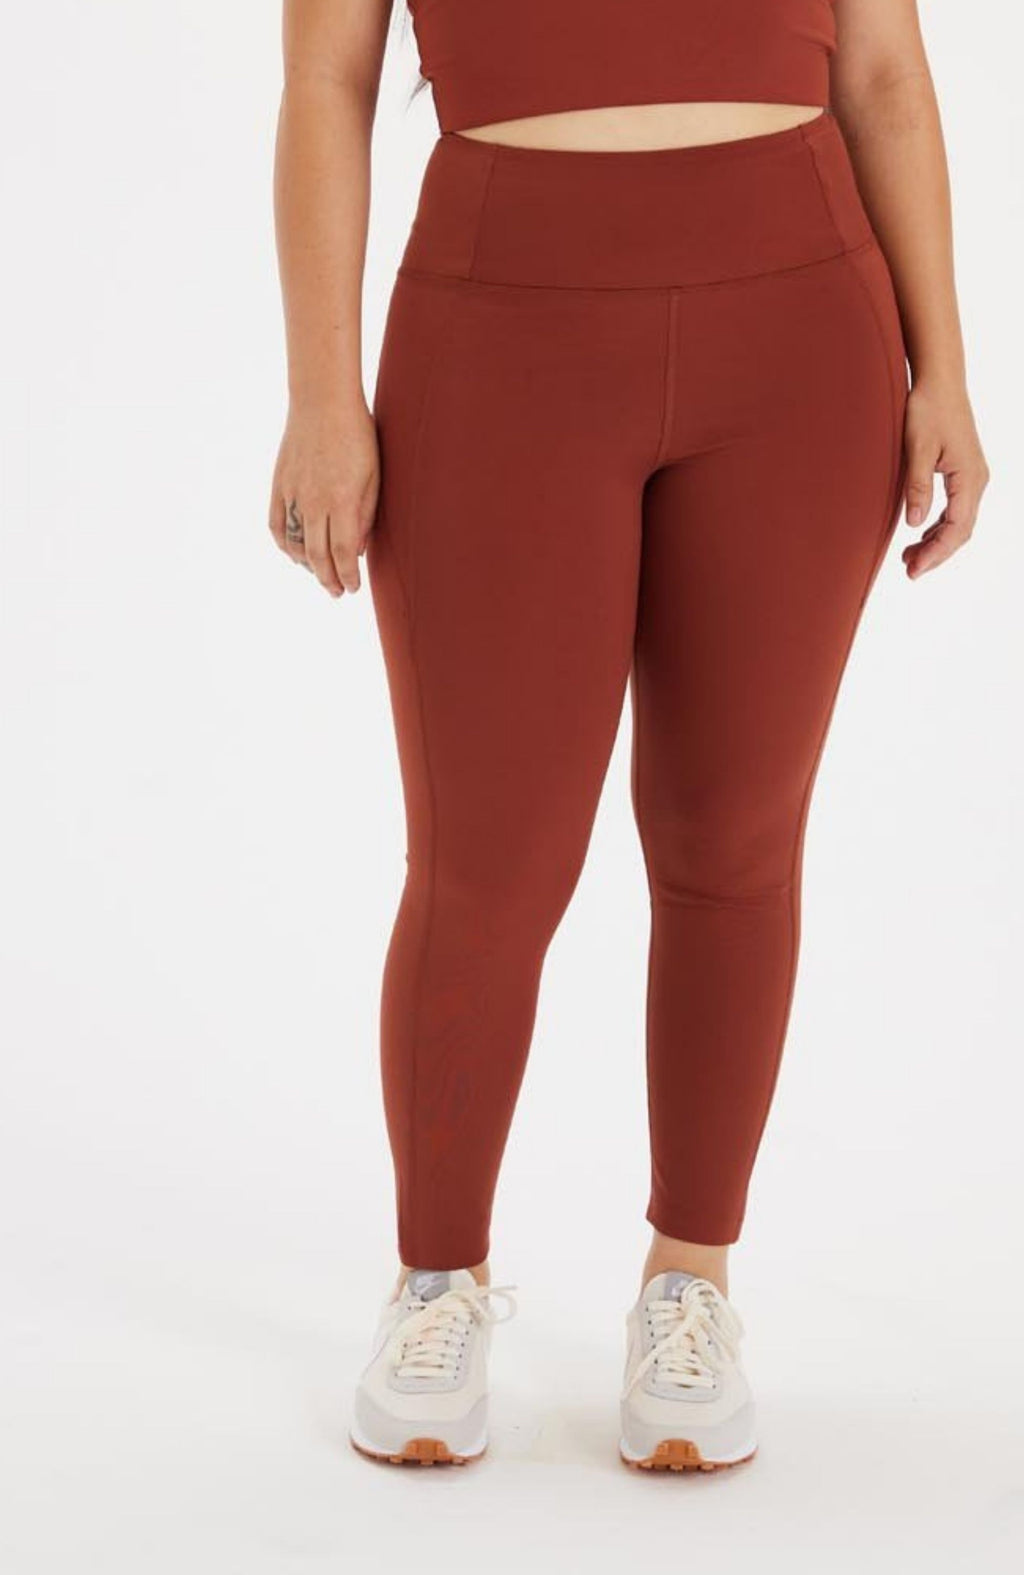 Freesize Leggings Fits small to xl Price $50 A Mansoori Exclusive